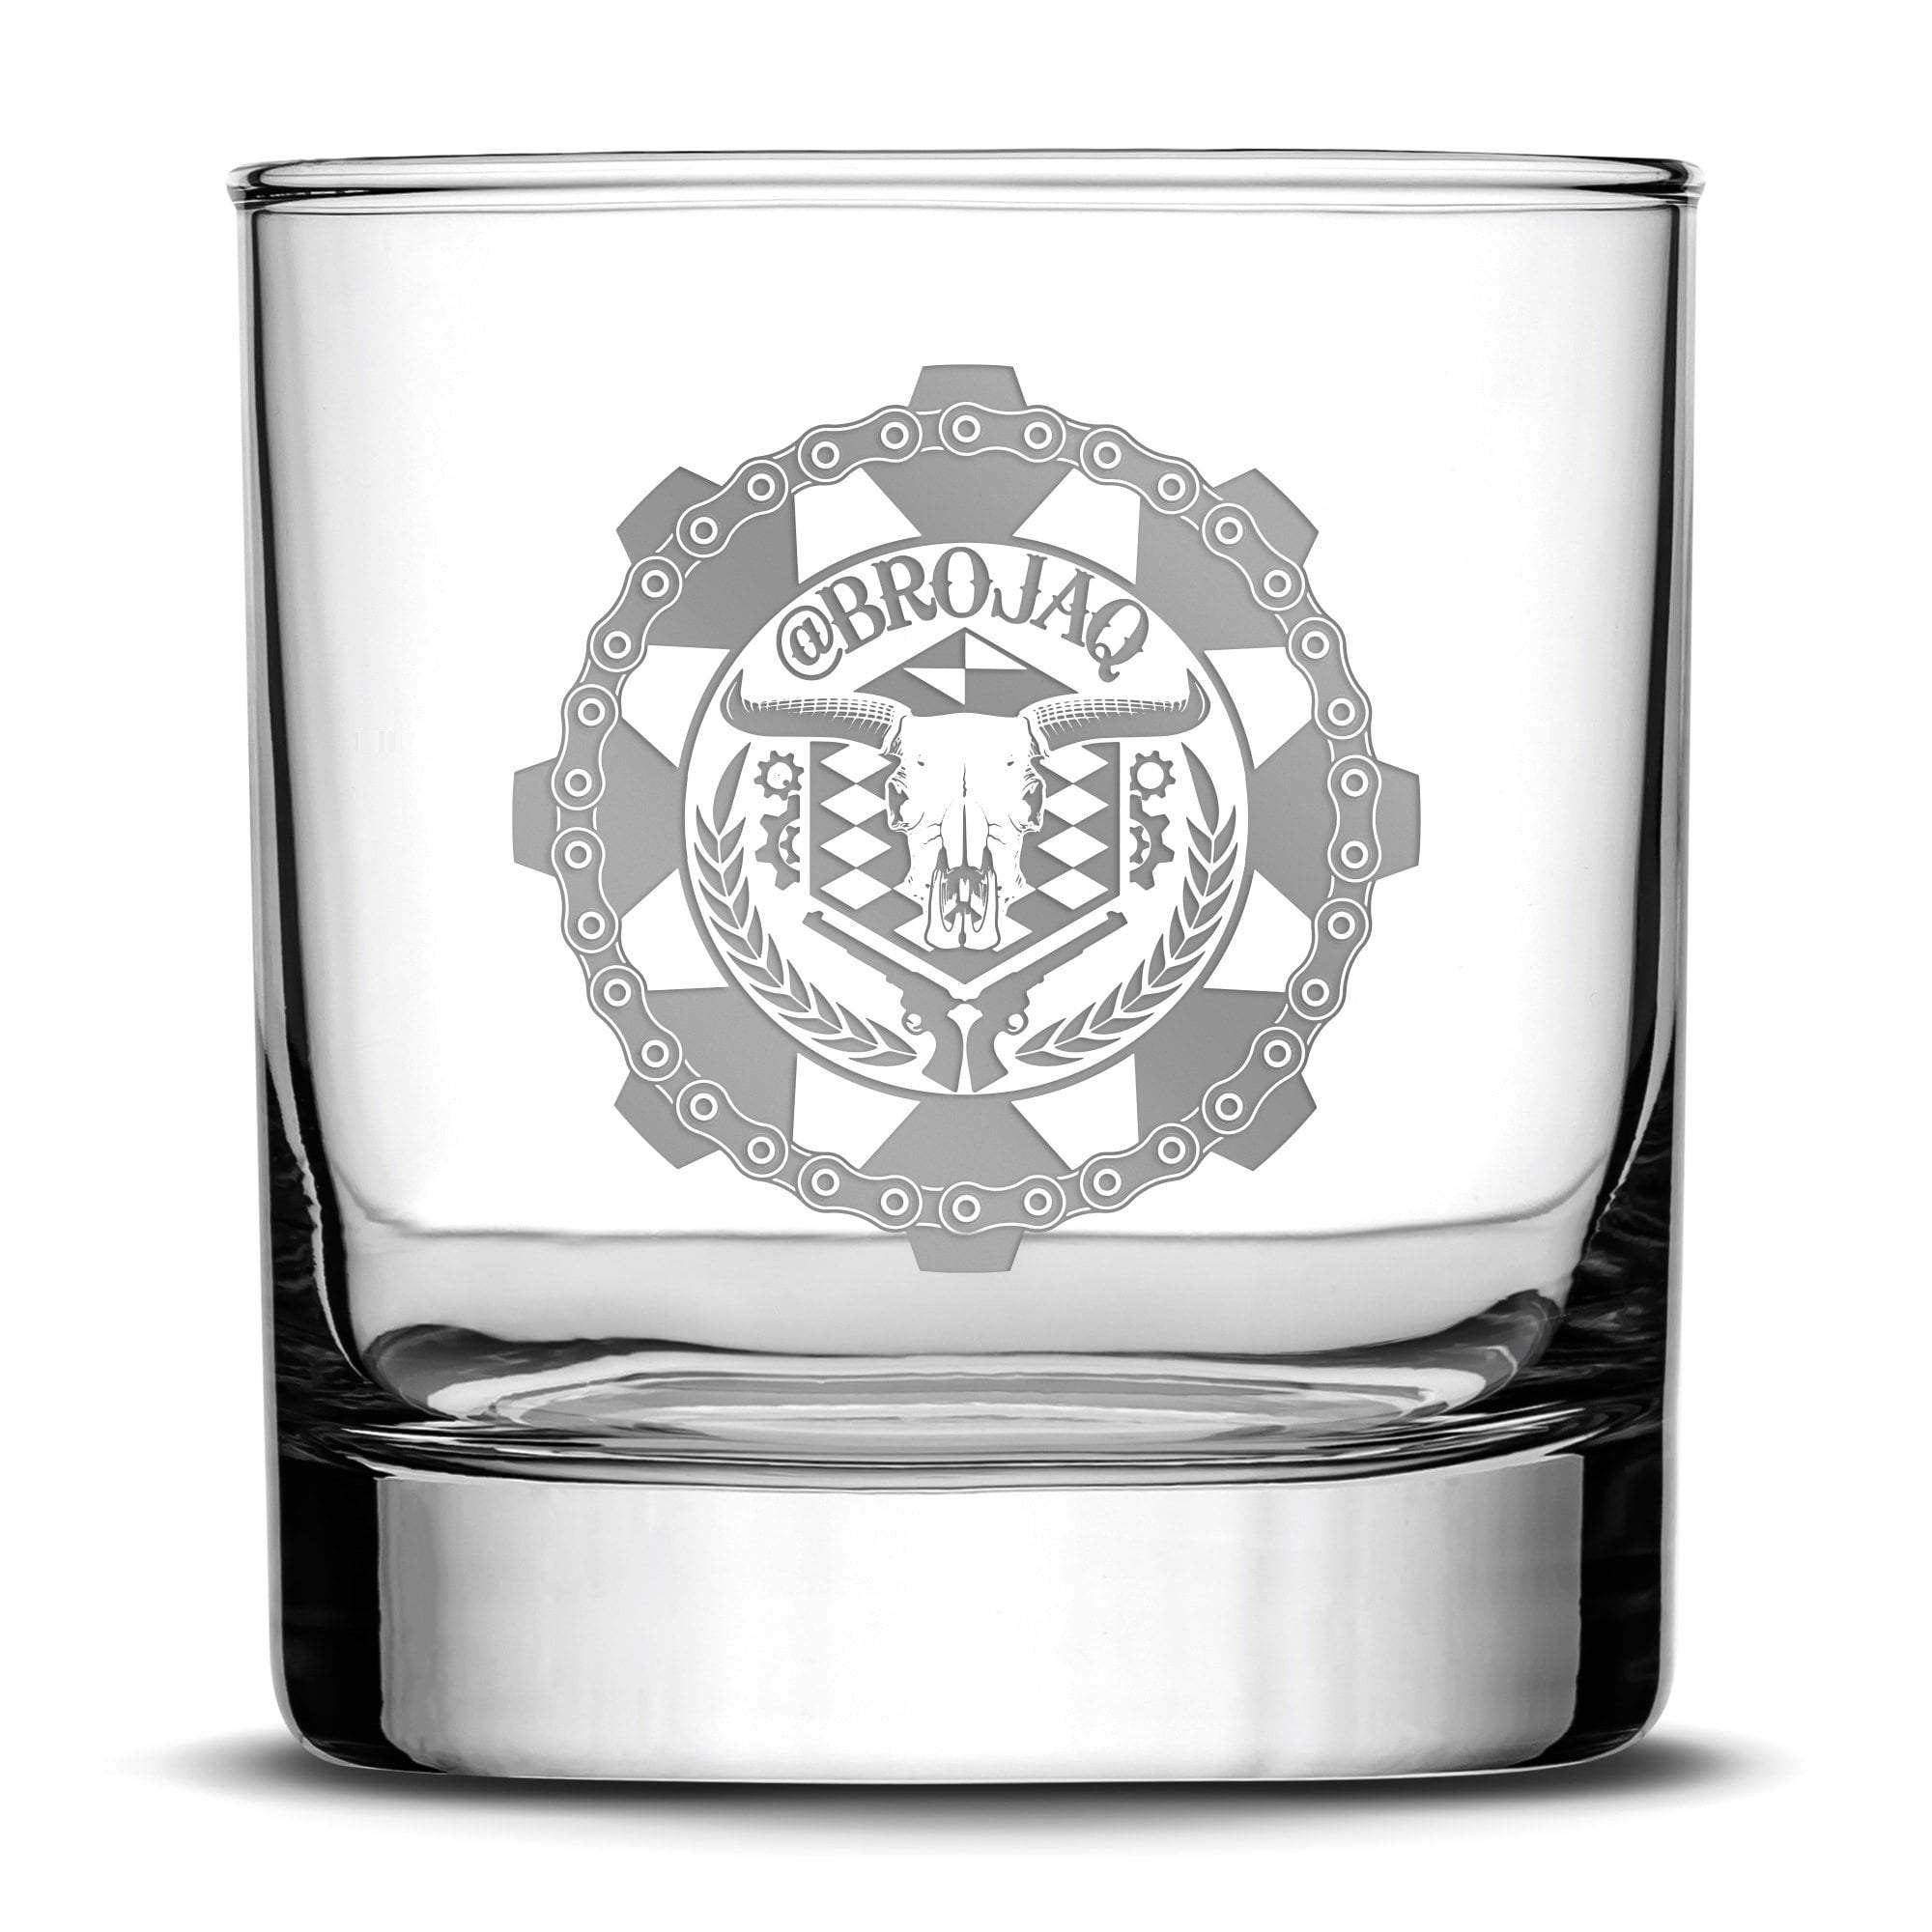 Silver Etch Premium Whiskey Glass, Hand-Etched Liquor and Rocks Tumbler, Old Fashioned Brojaq Sprocket, Made in USA, 11oz Integrity Bottles